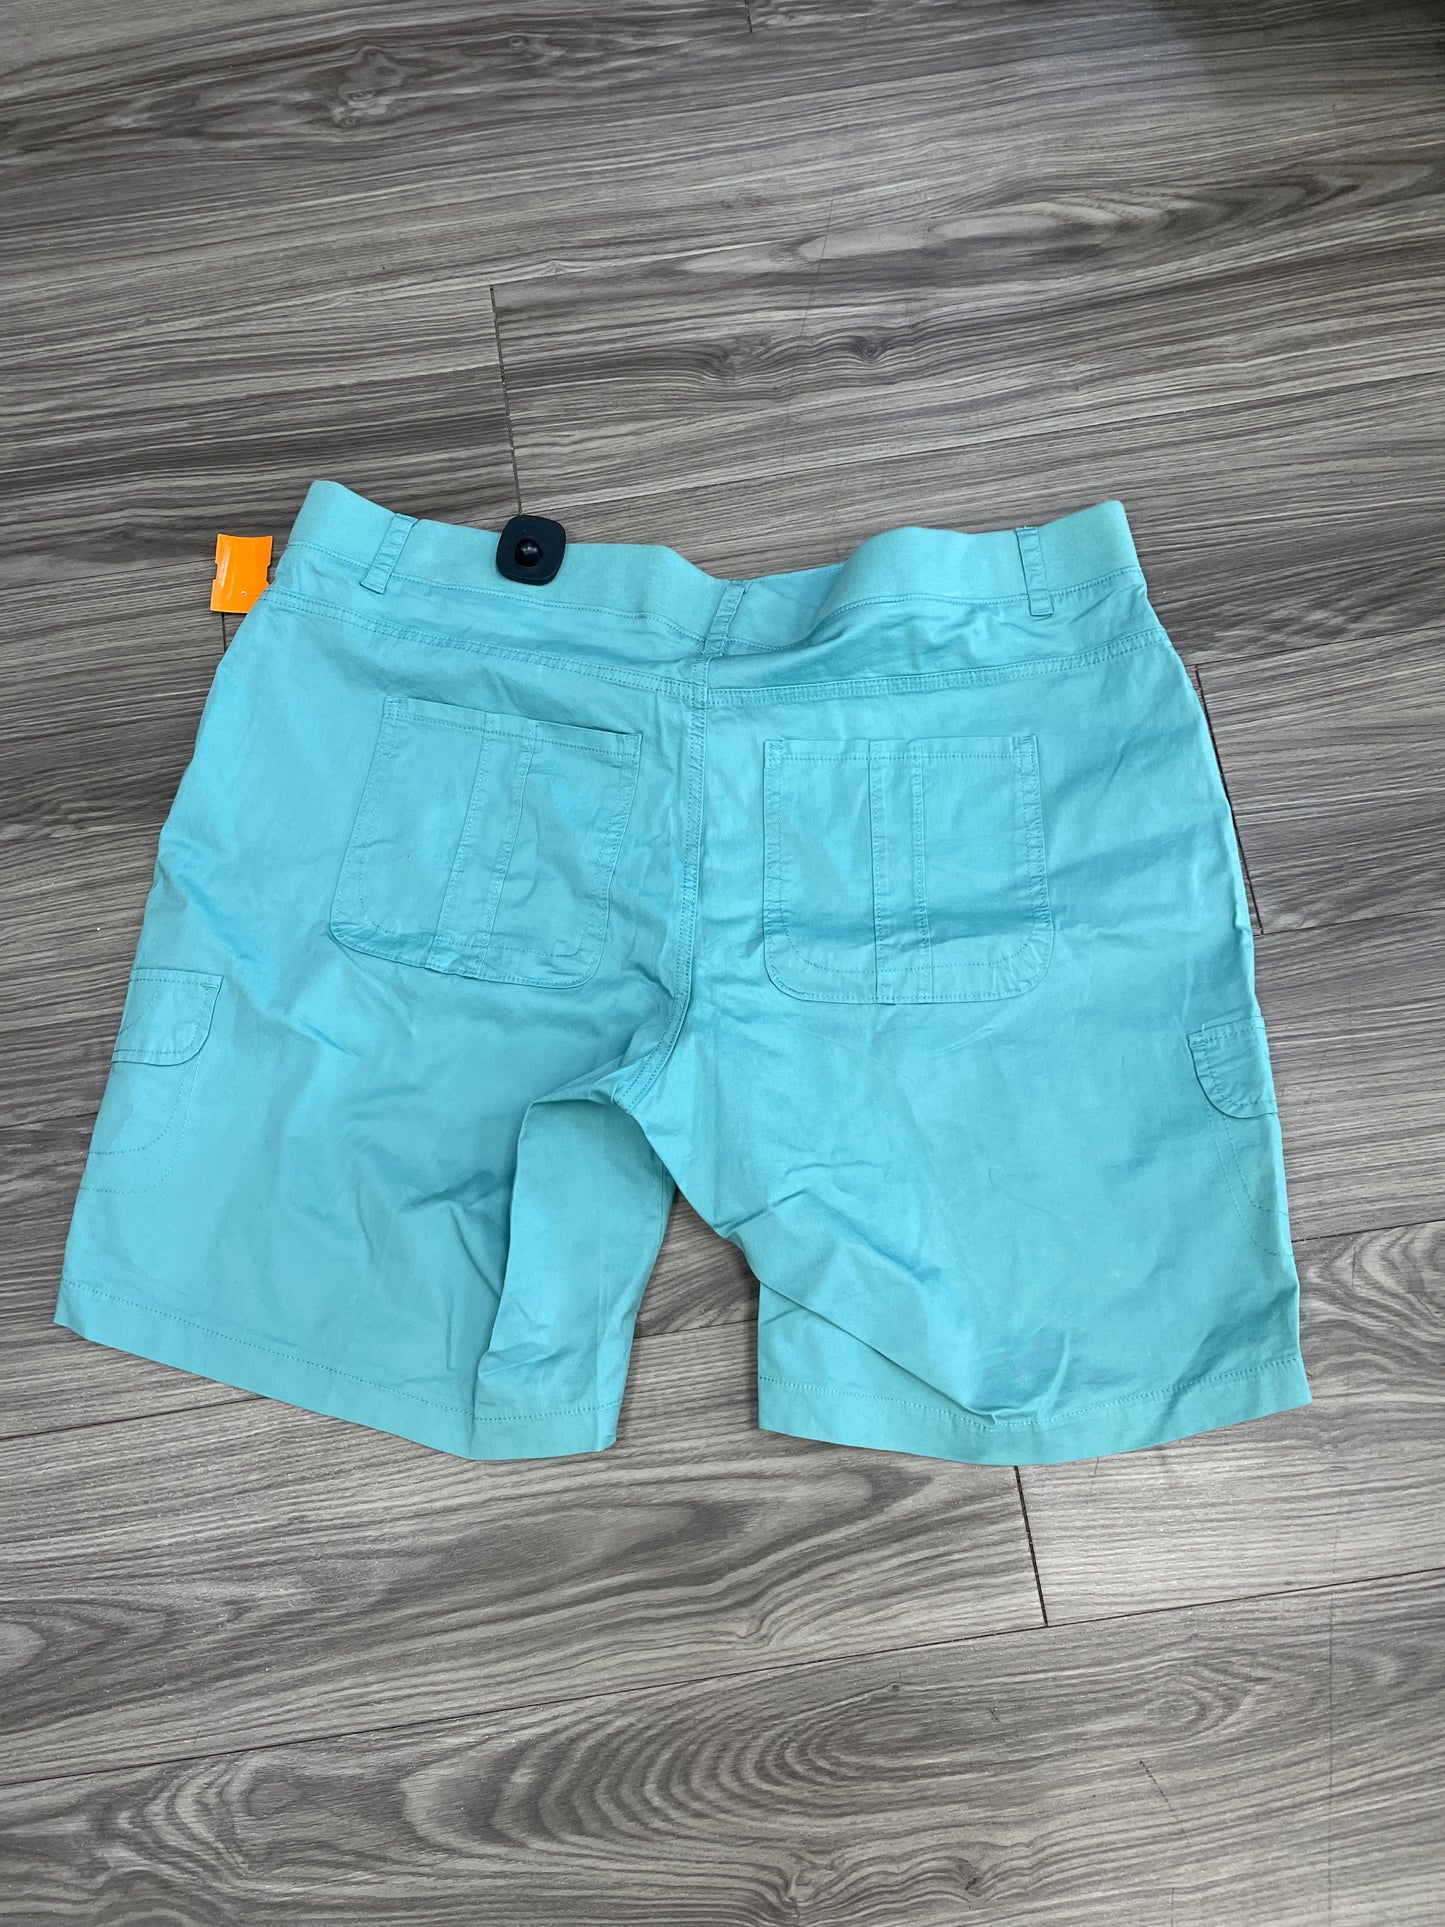 Shorts By Lee  Size: 22w